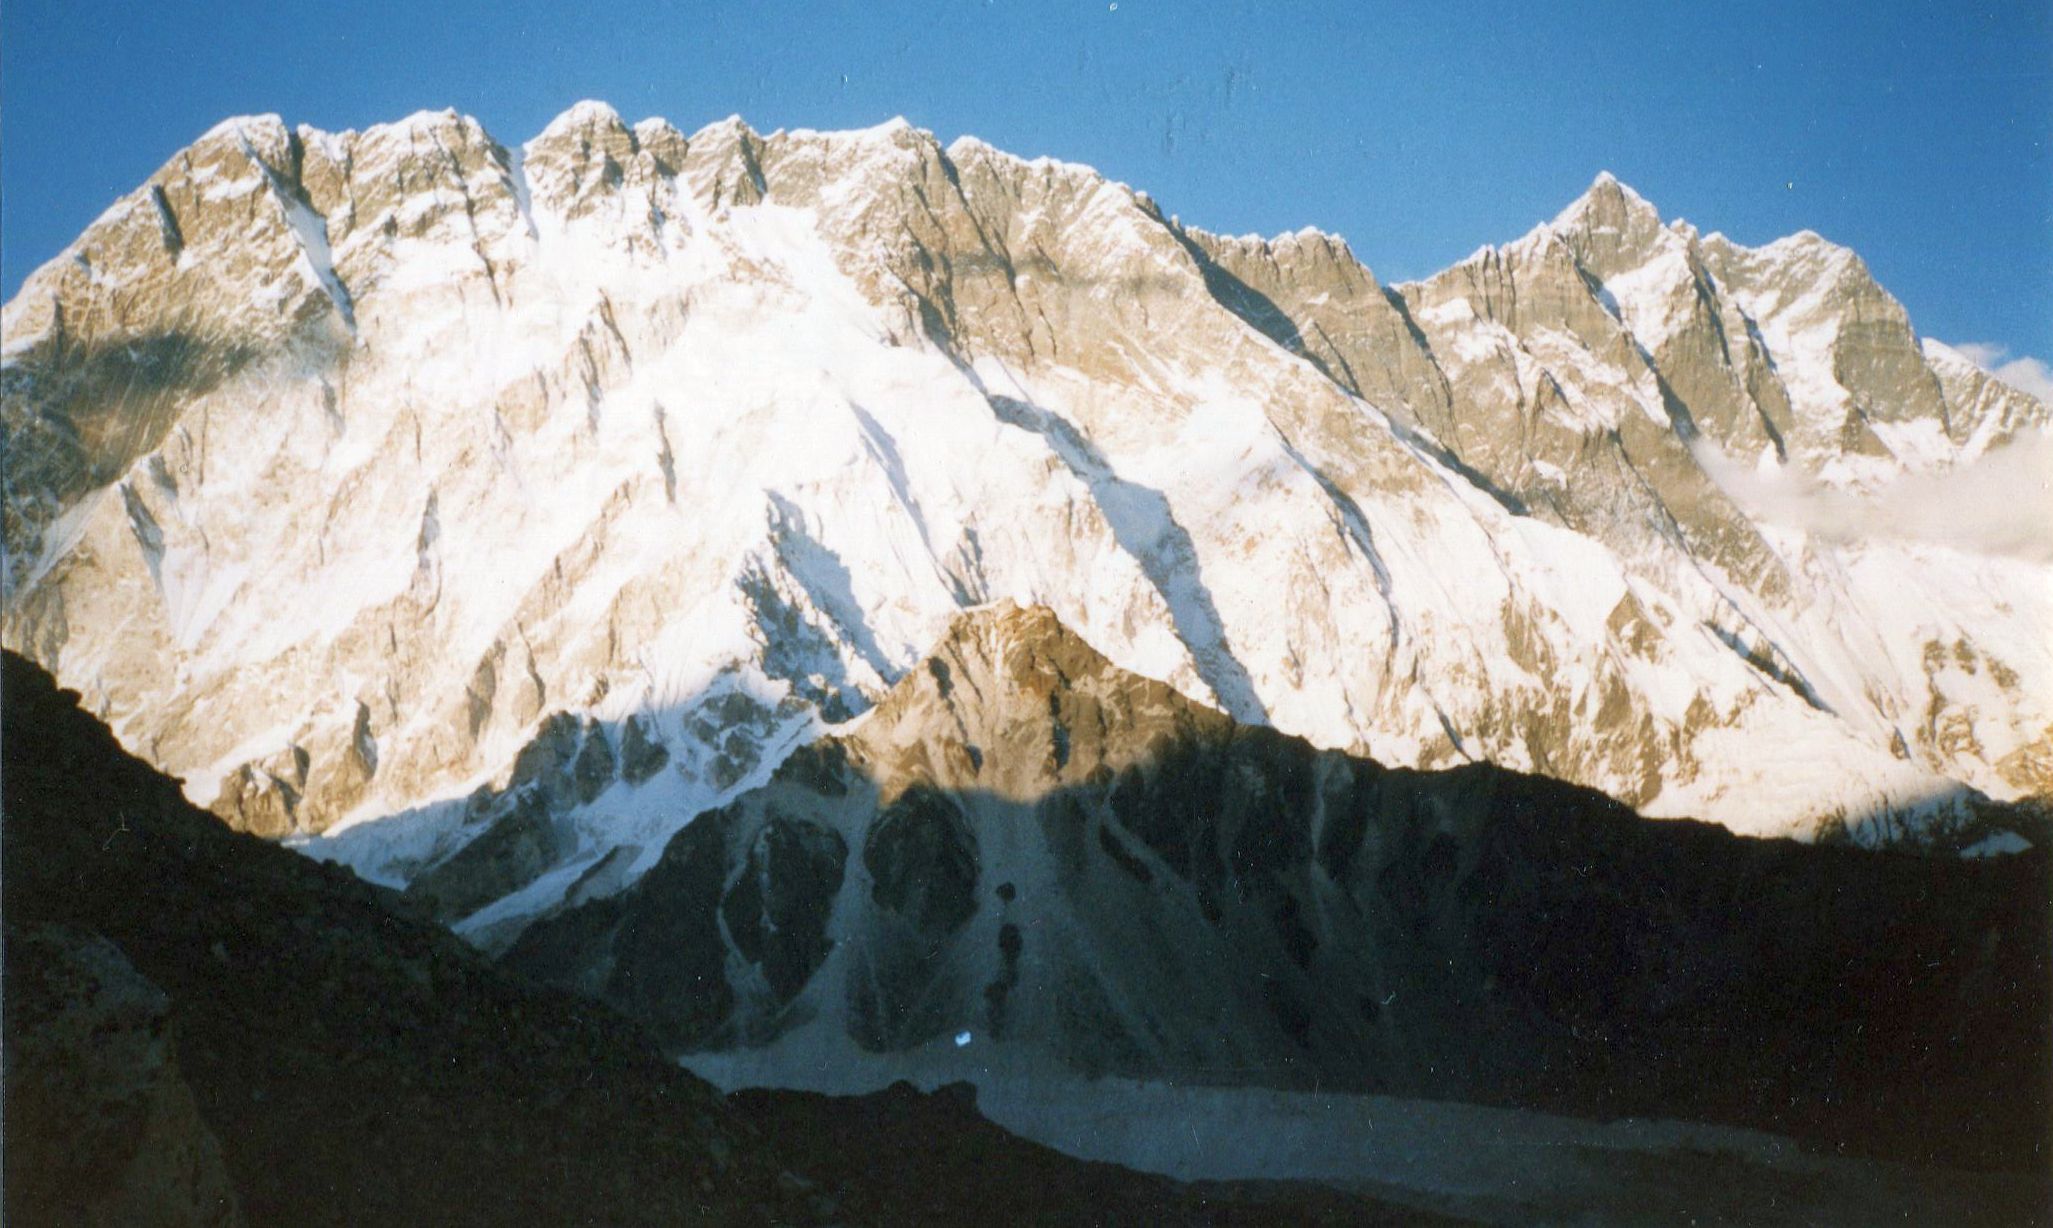 Nuptse-Lhotse Wall from above Chukhung in the Imja Khola Valley